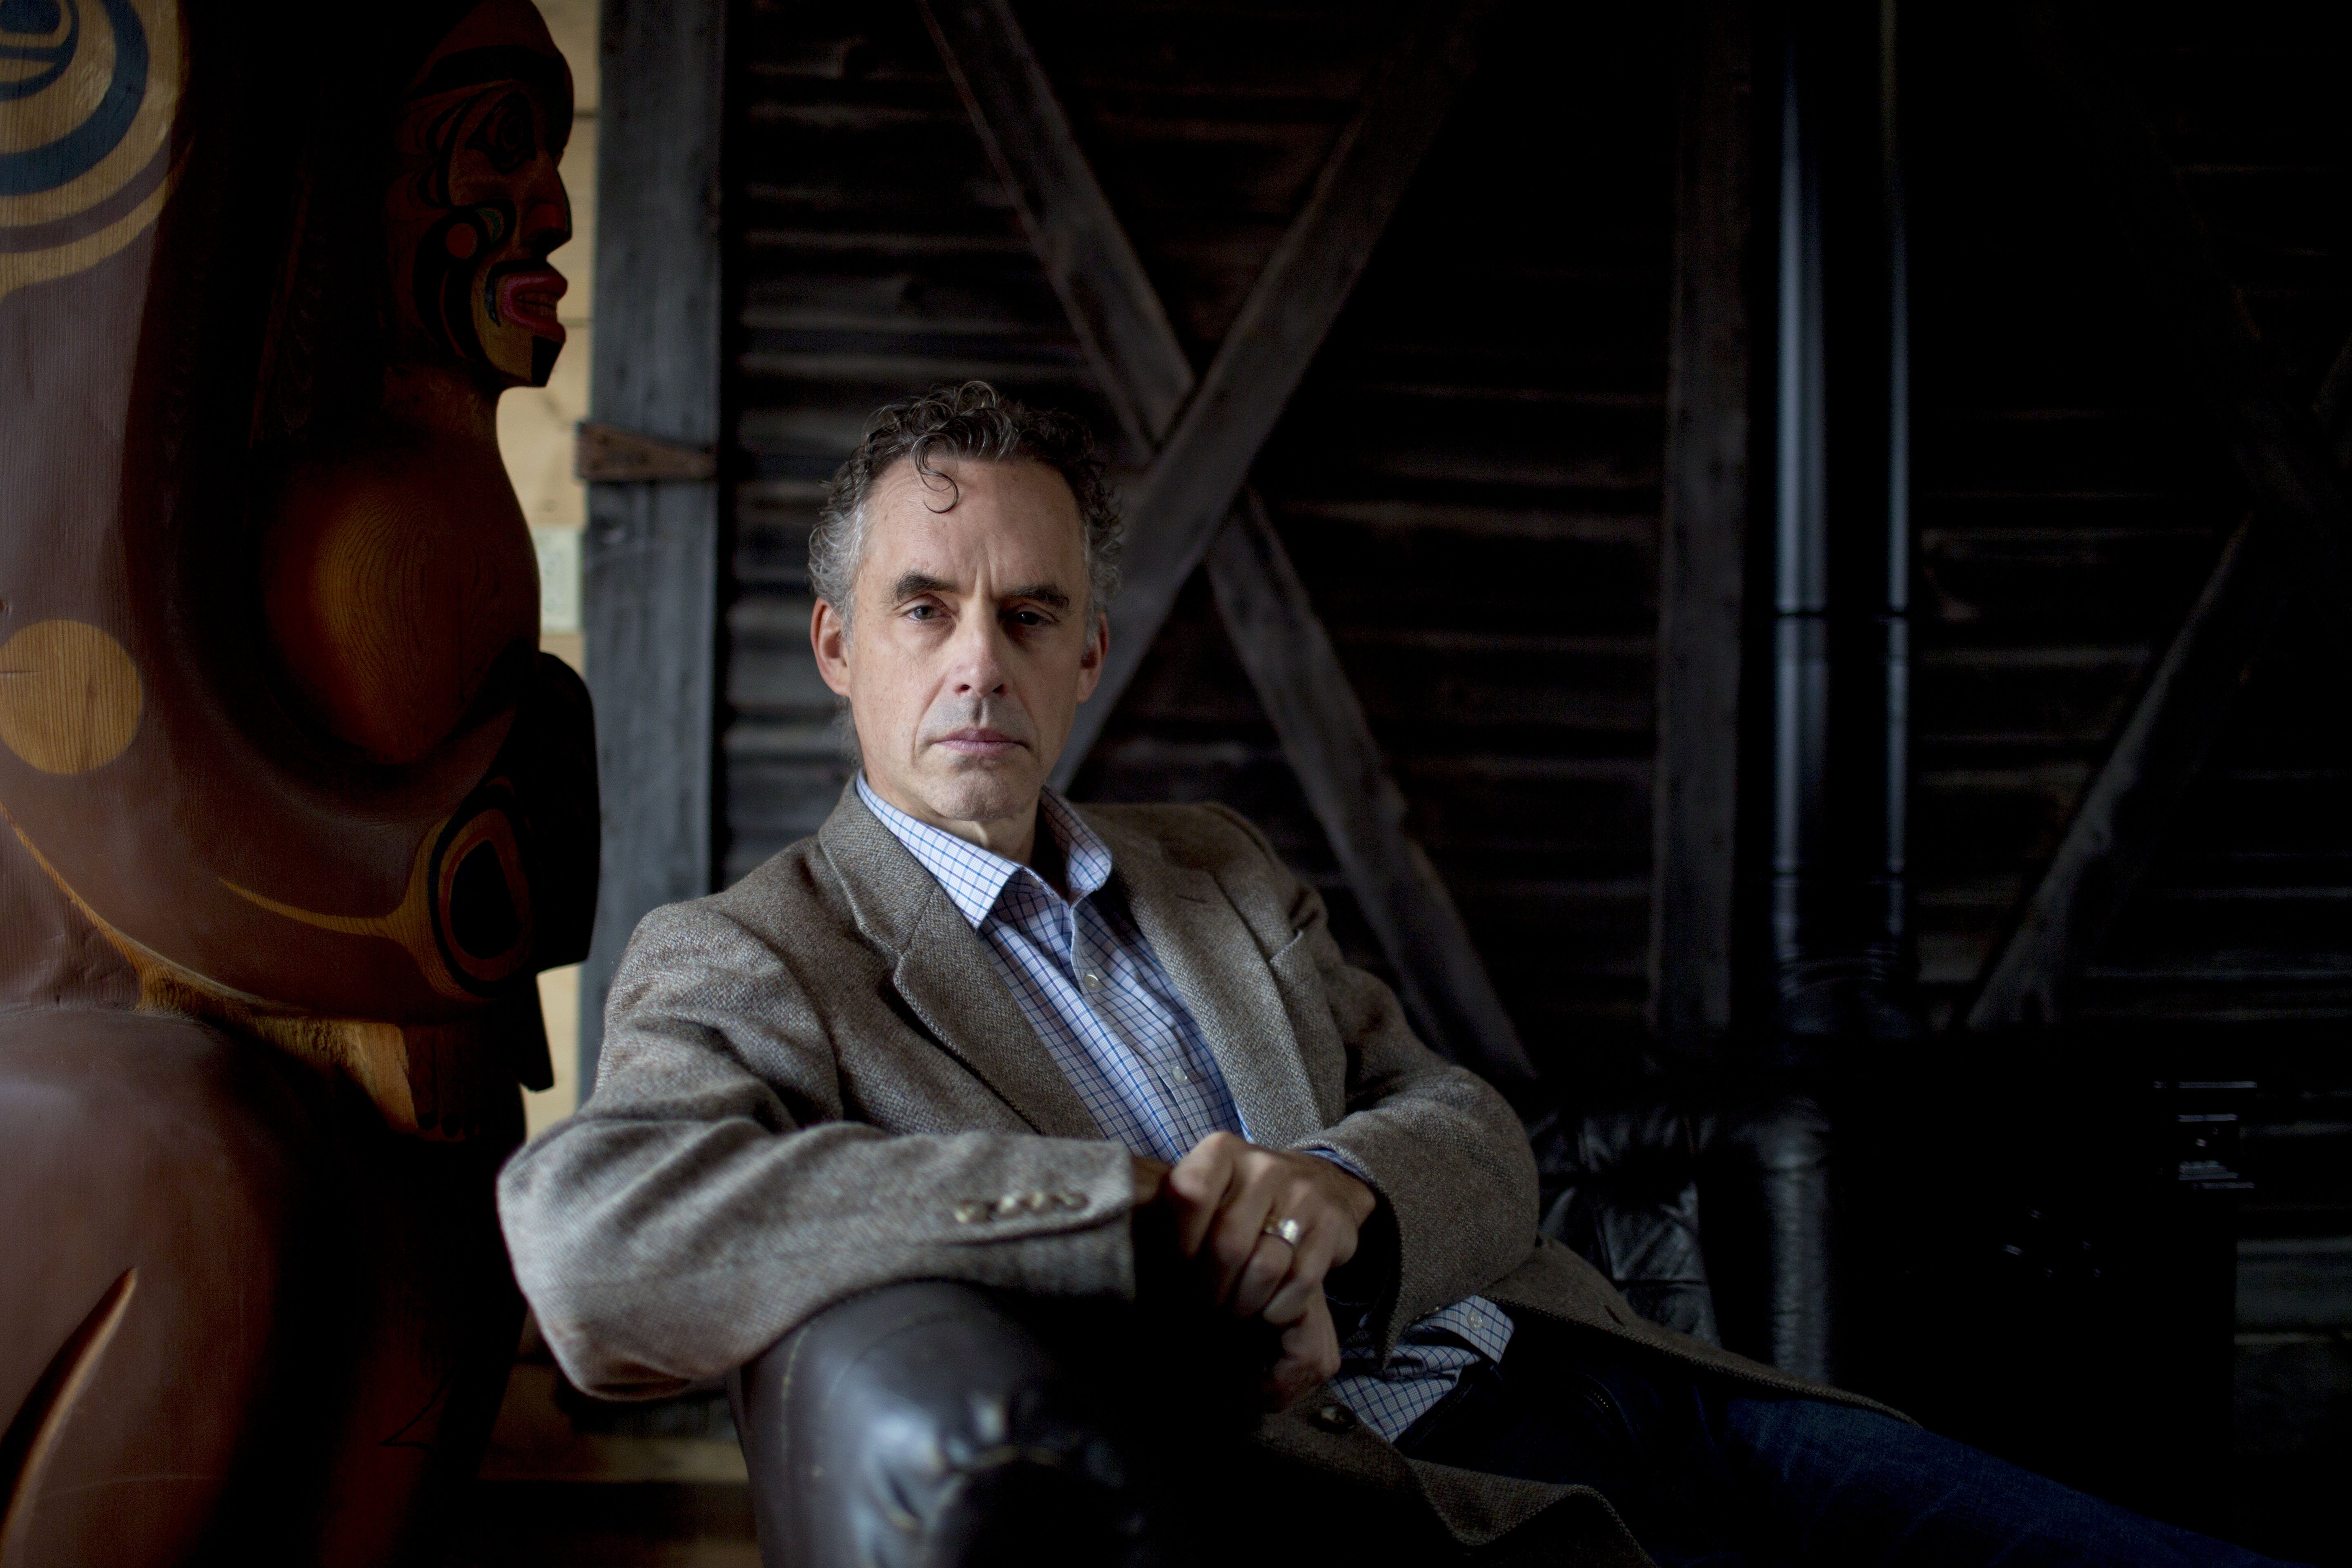 Jordan Peterson, author of “Twelve Rules for Life”